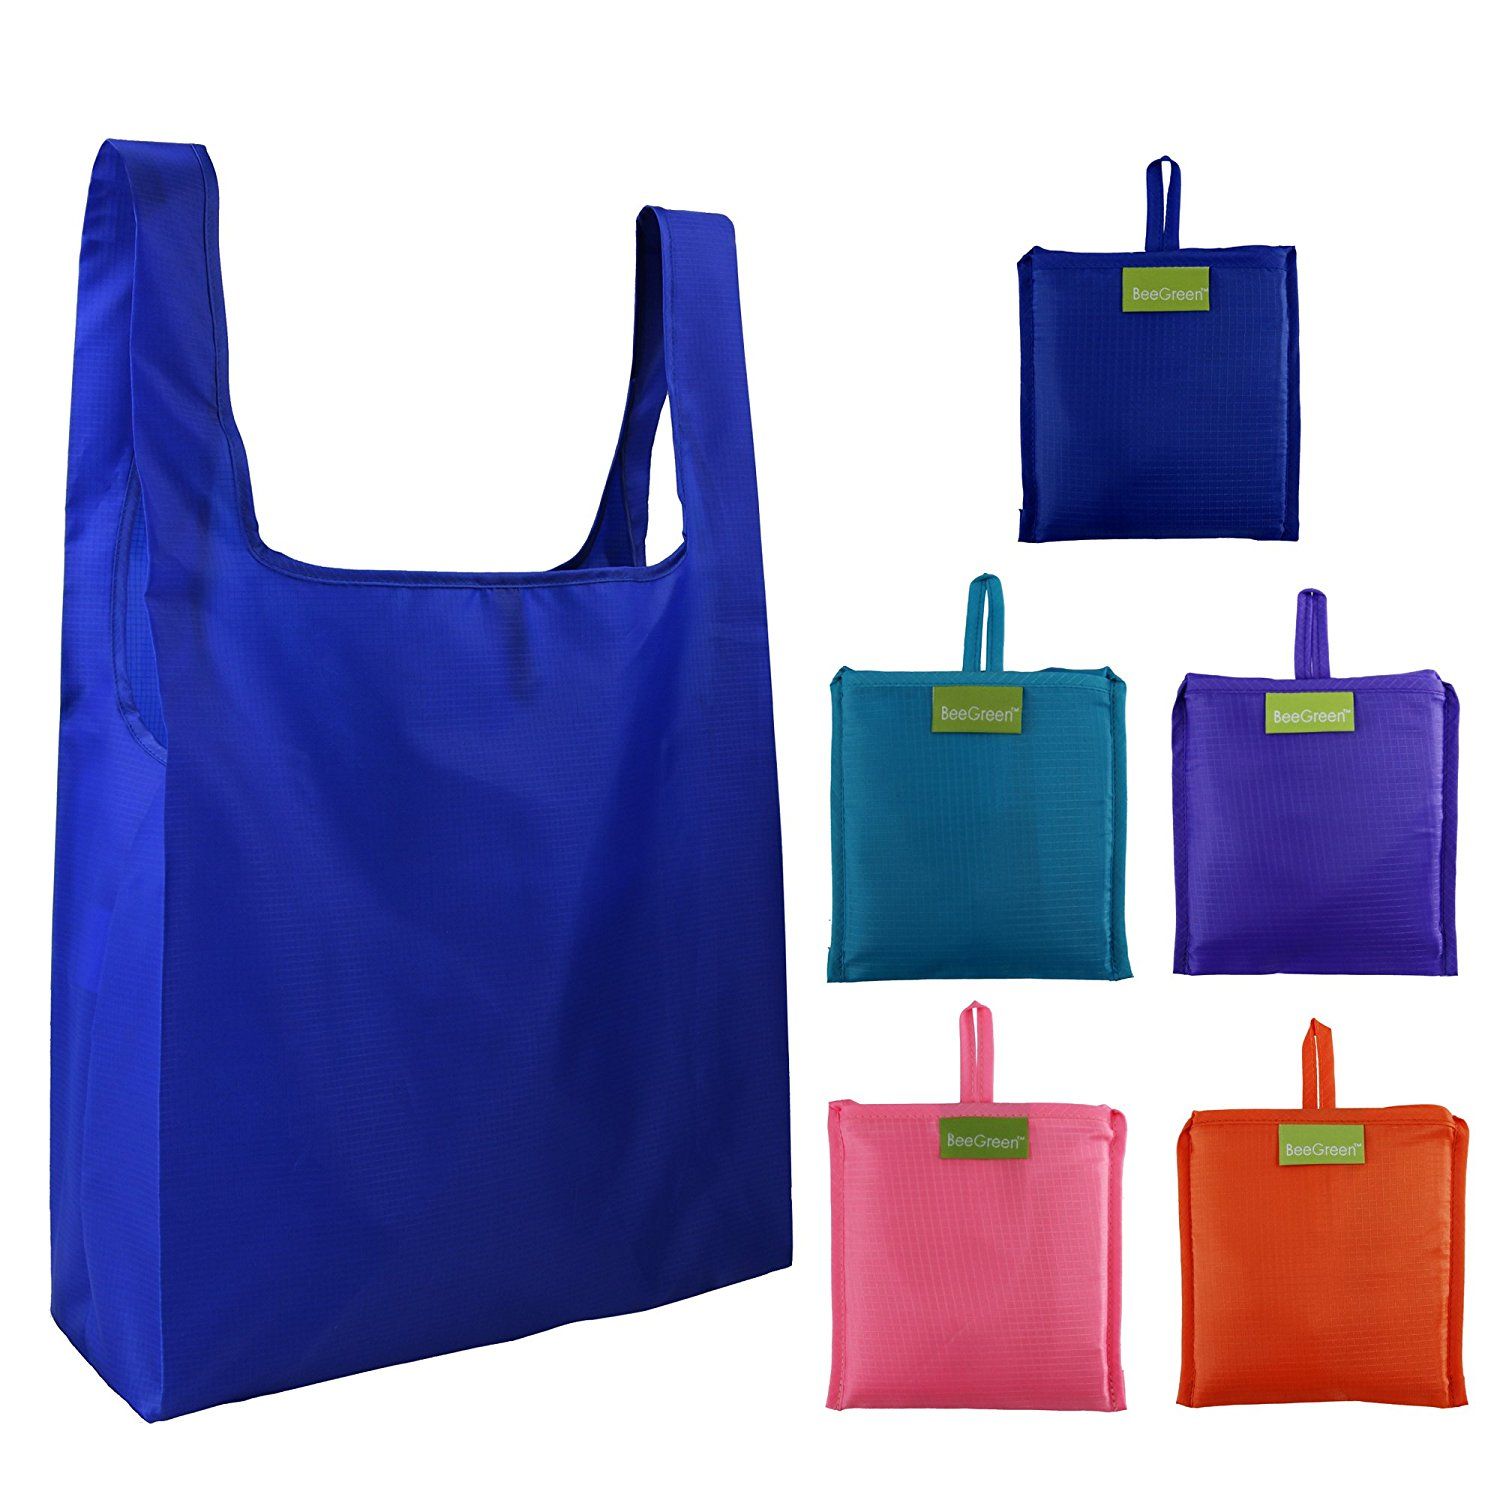 Creation Hack: Train Yourself to Use Reusable Shopping Bags